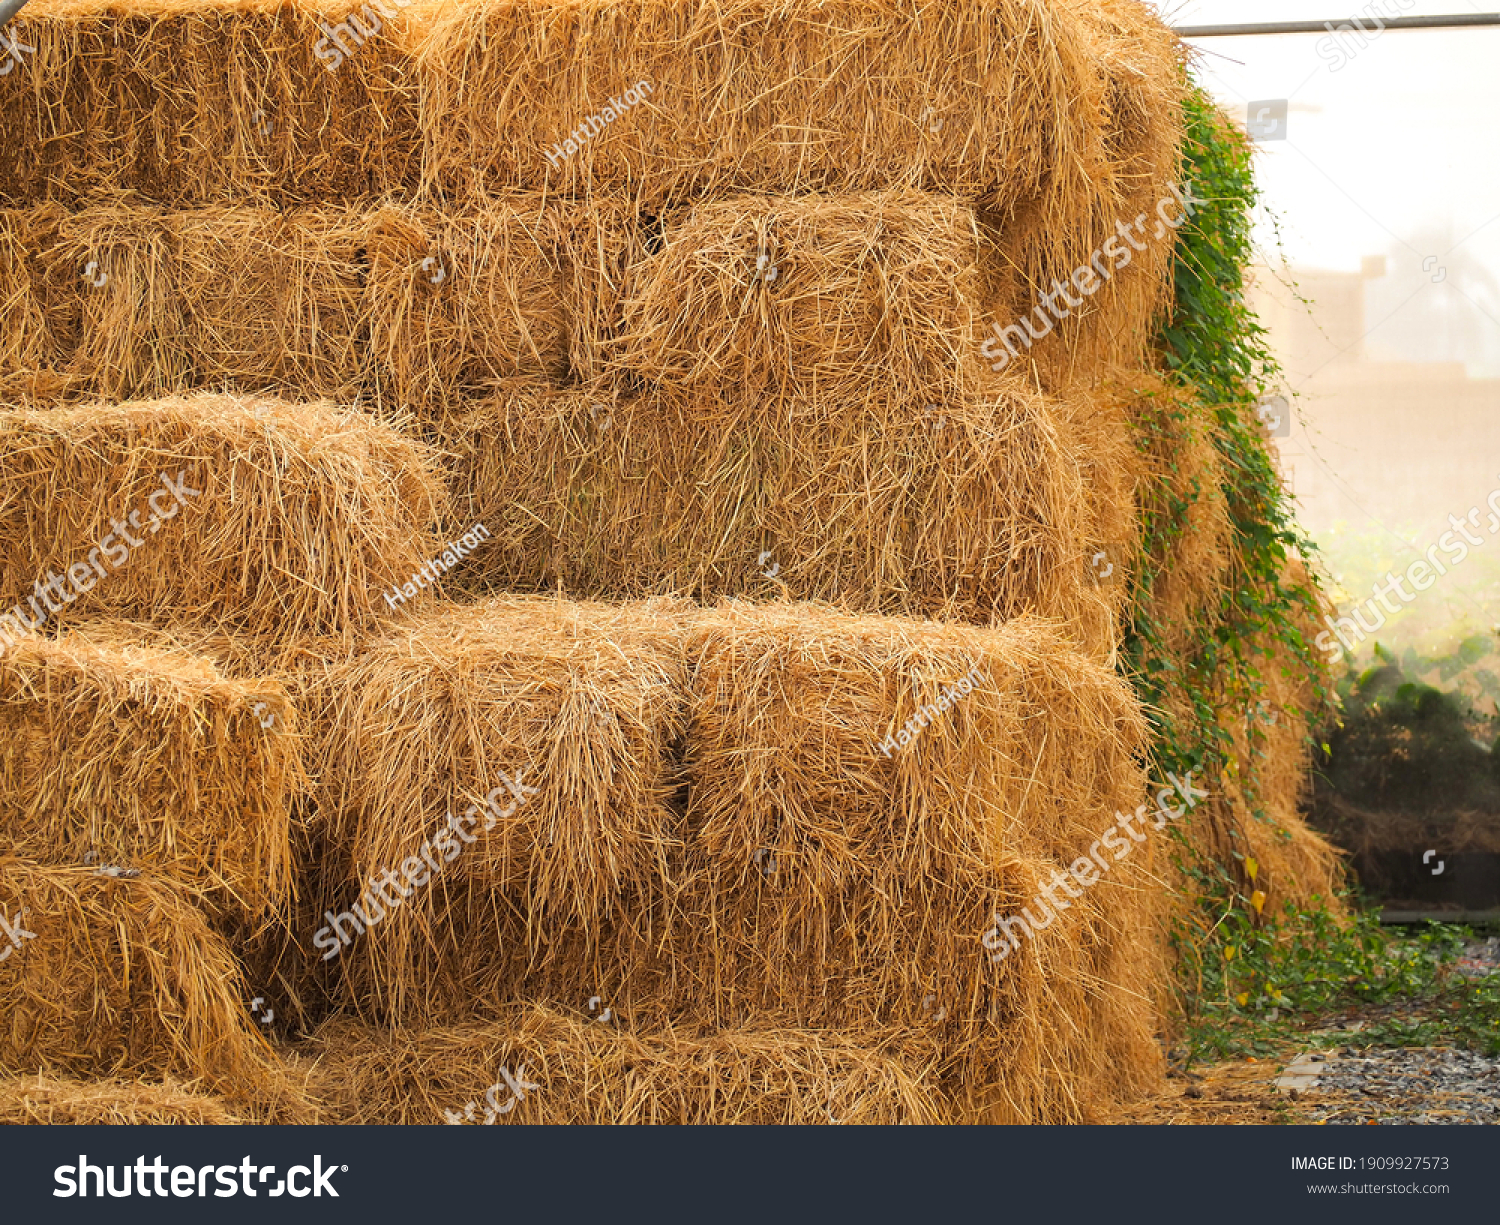 Haystack, a bale of hay group. Agriculture farm and farming symbol of harvest time with dry grass (hay),  hay pile of dried grass hay straw.
 #1909927573